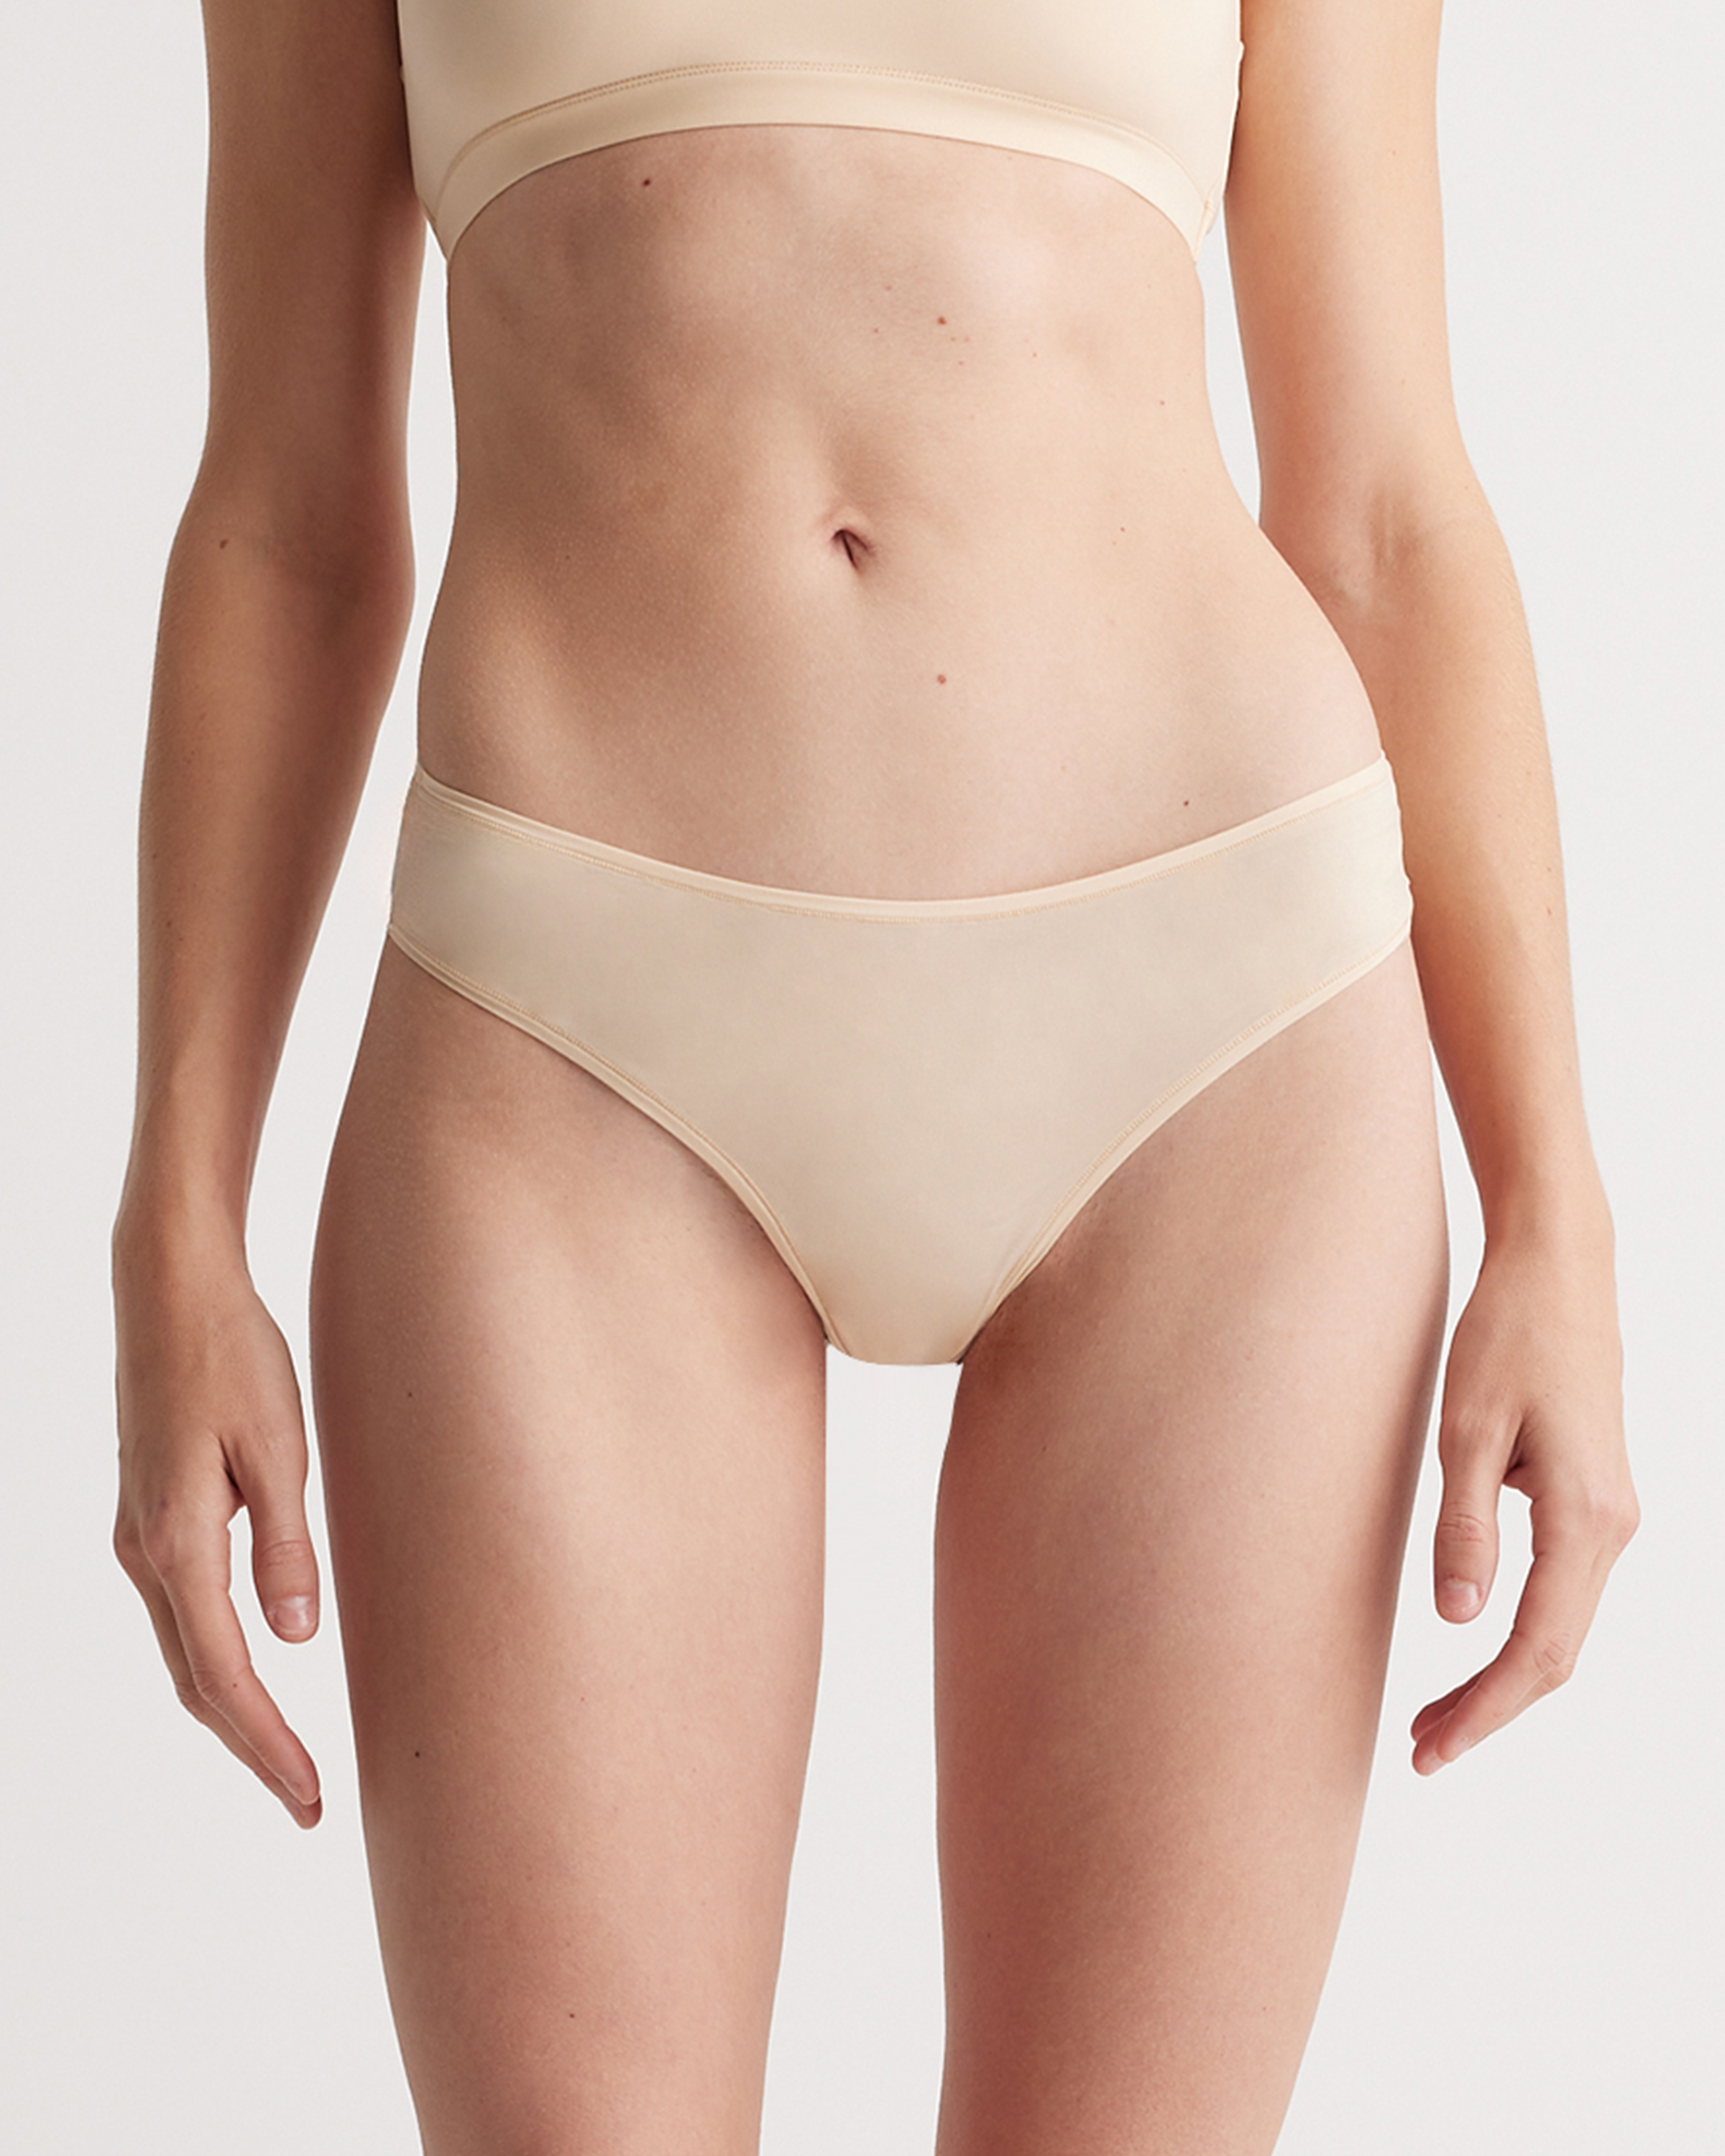 Women's Barely There T-string Thong Panties (6-Pack)